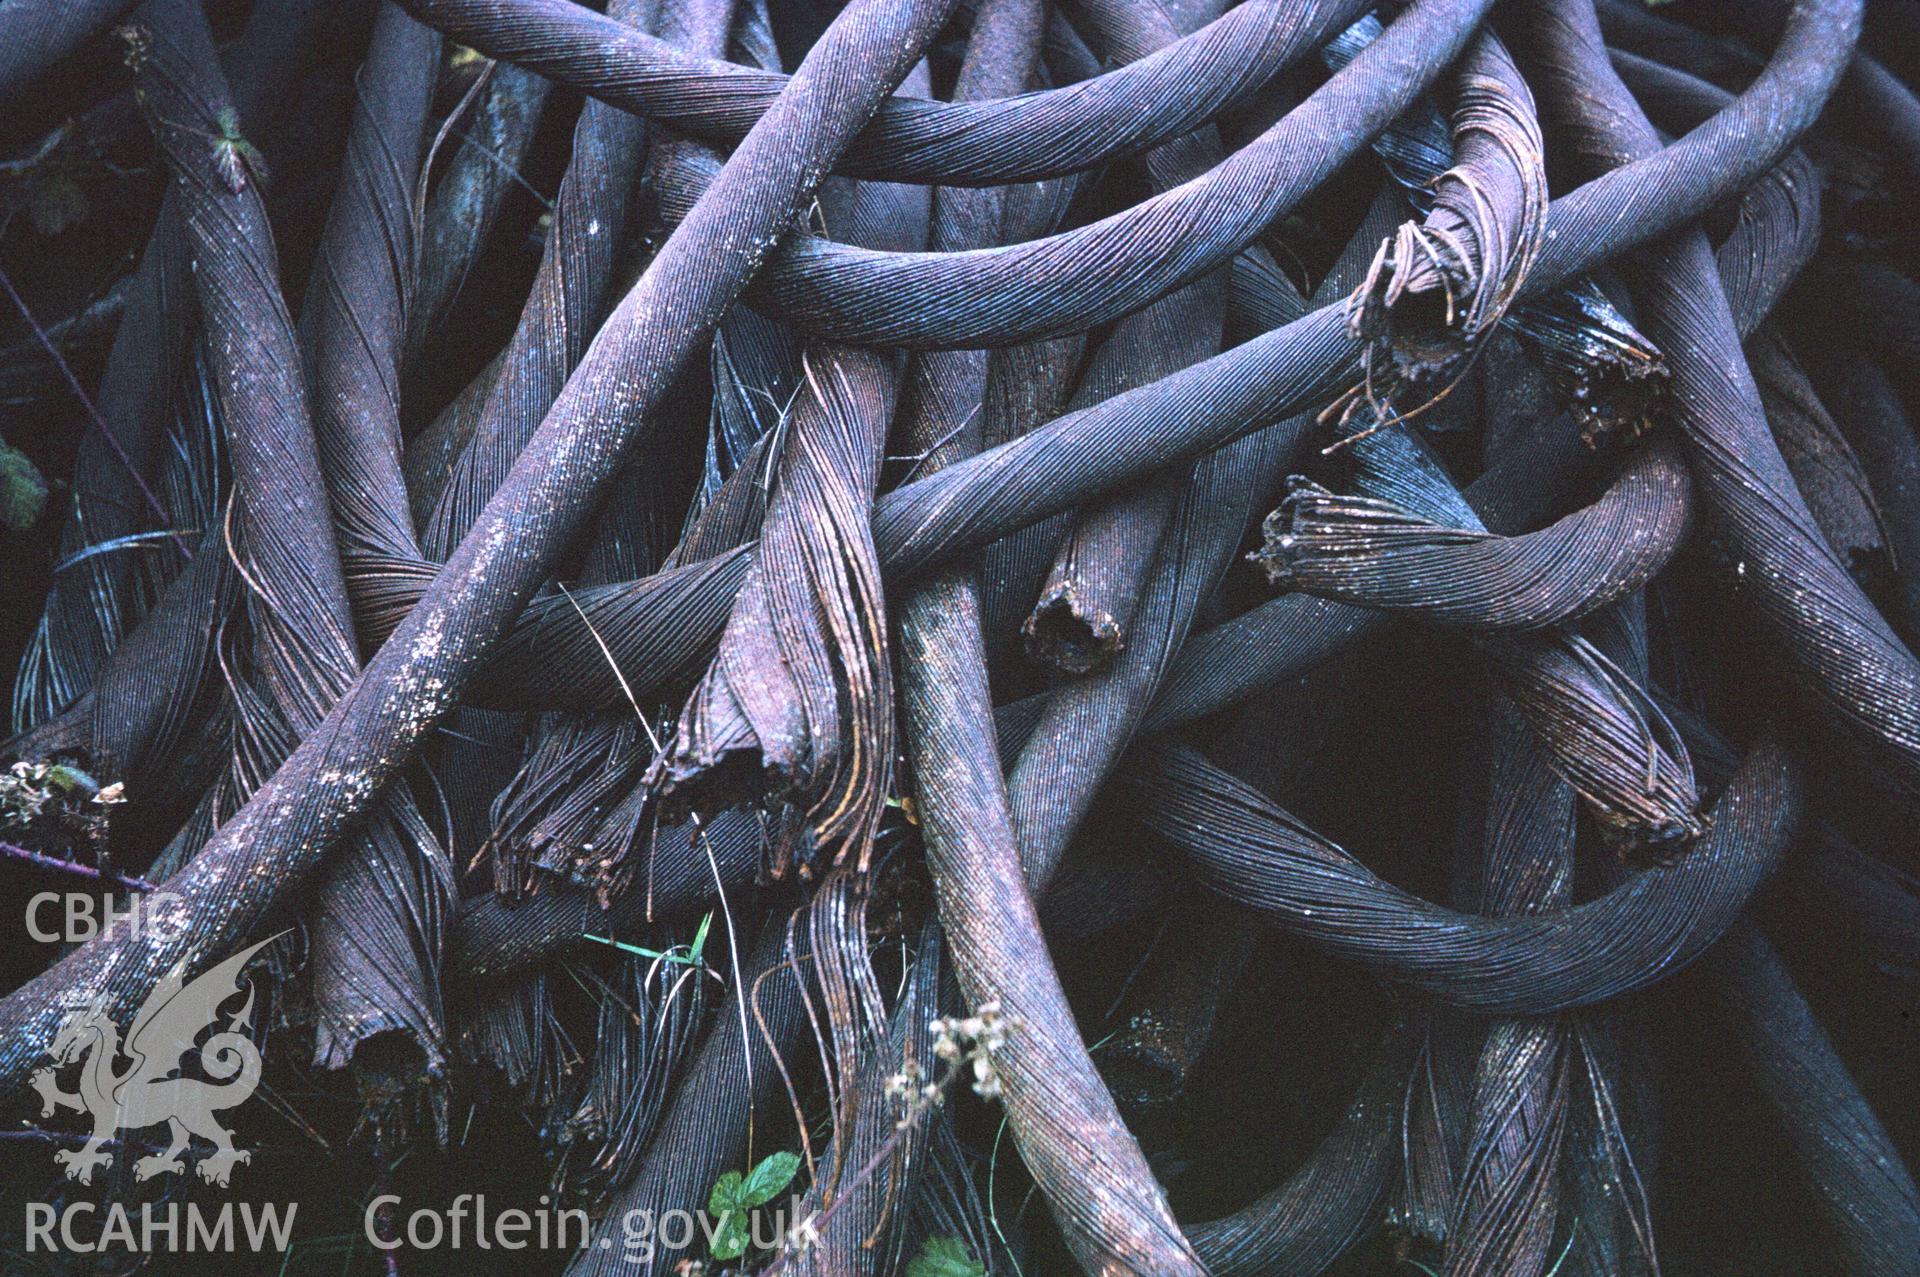 35mm colour slide showing wire cables at Kidwelly Tin-Plate Works, Carmarthenshire, by Dylan Roberts.